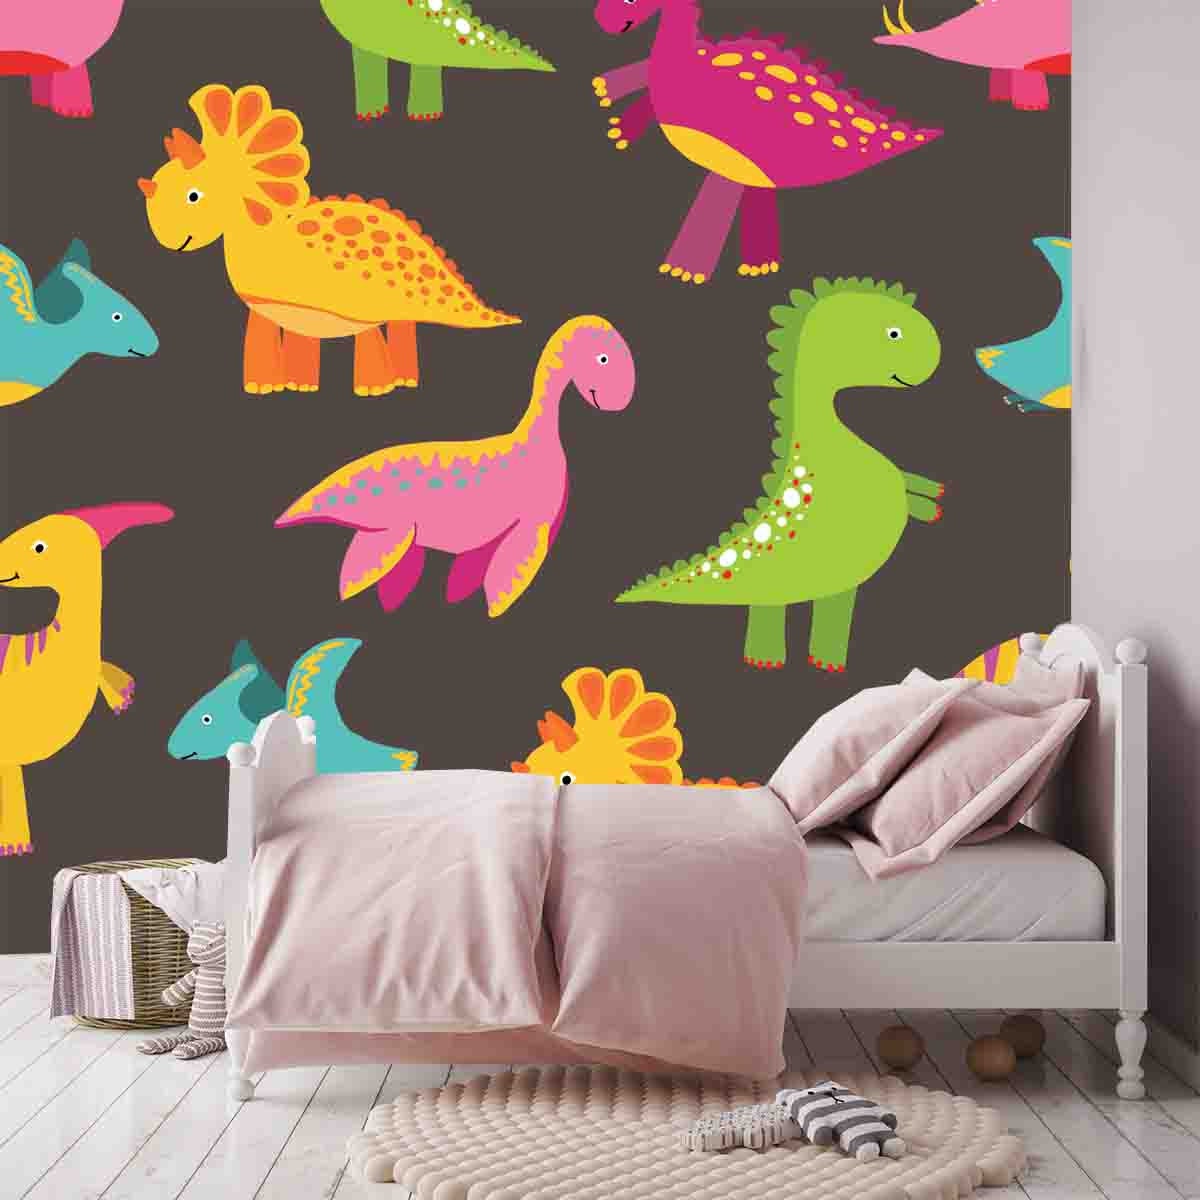 Colorful Cartoon Dinosaurs of Different Types Wallpaper Little Girl Bedroom Mural